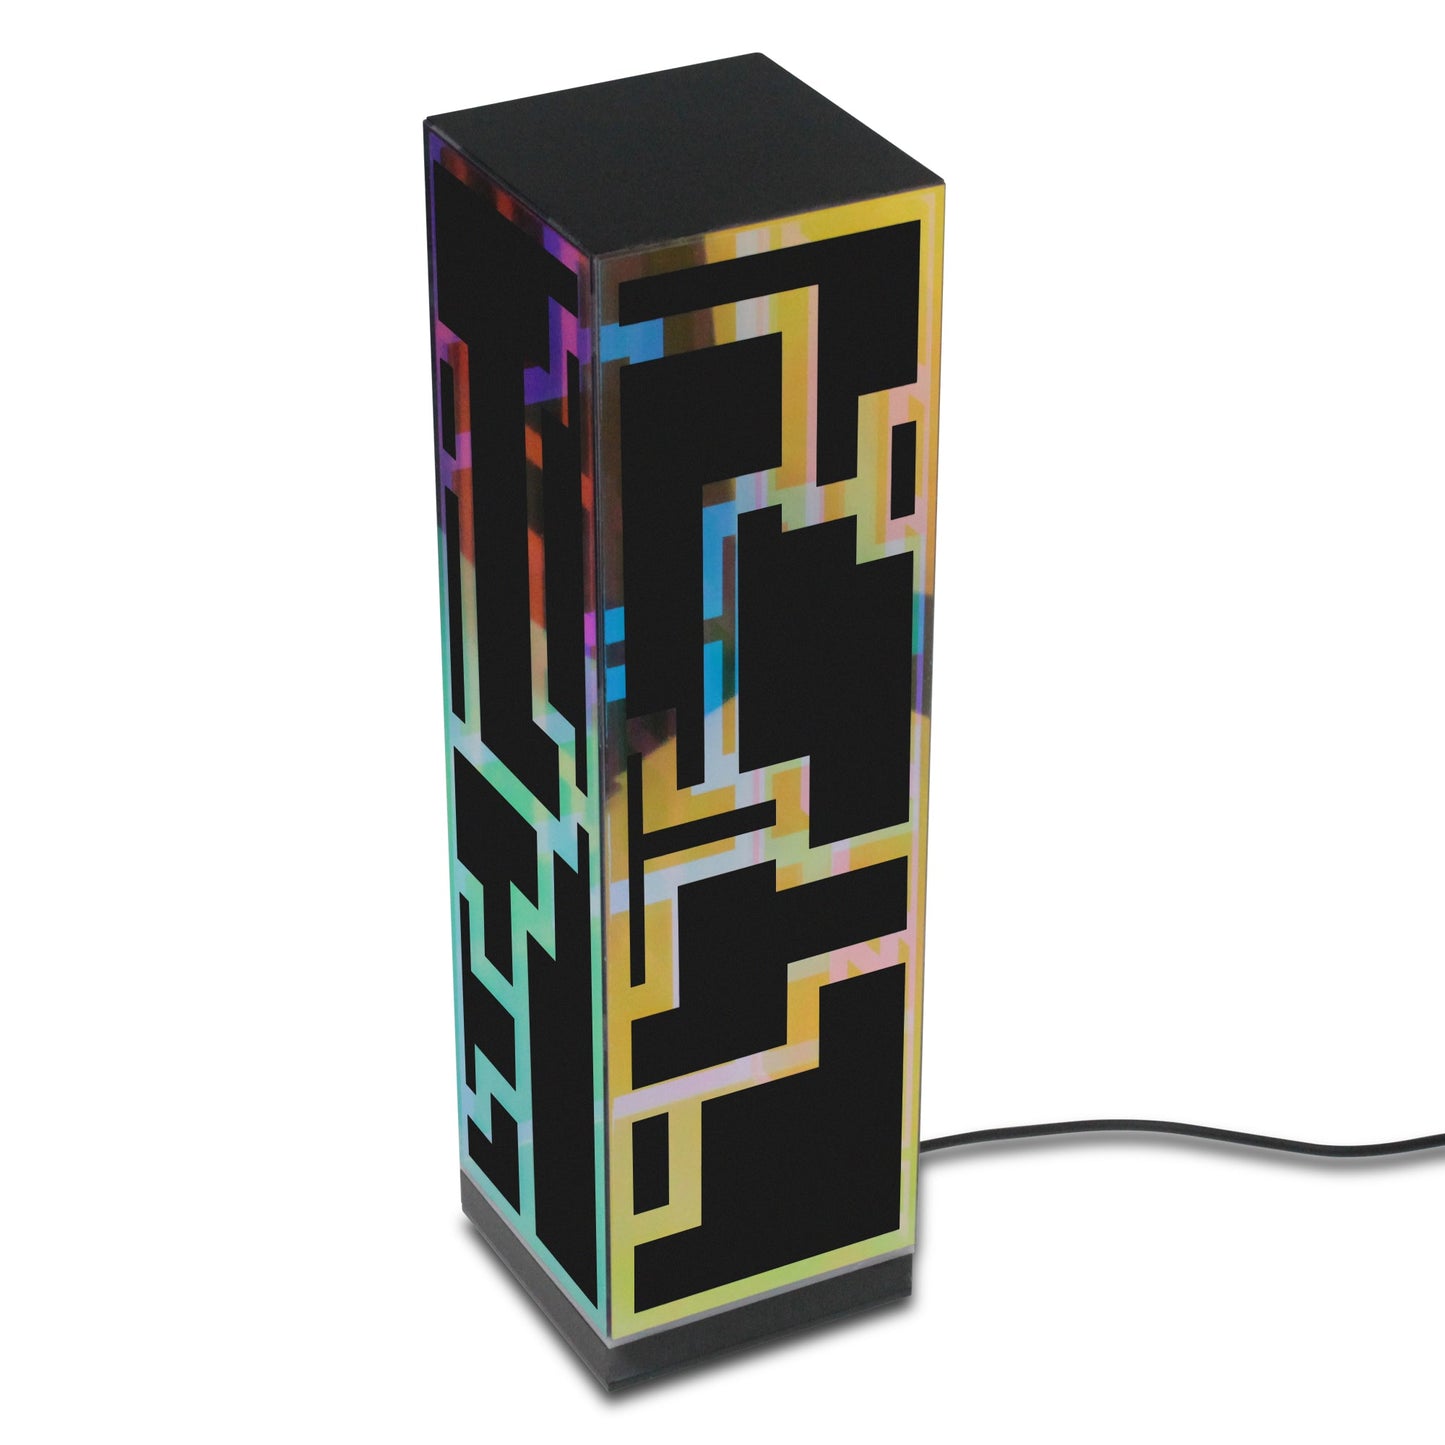 RGB lamp, Table lamp, holiday gifts